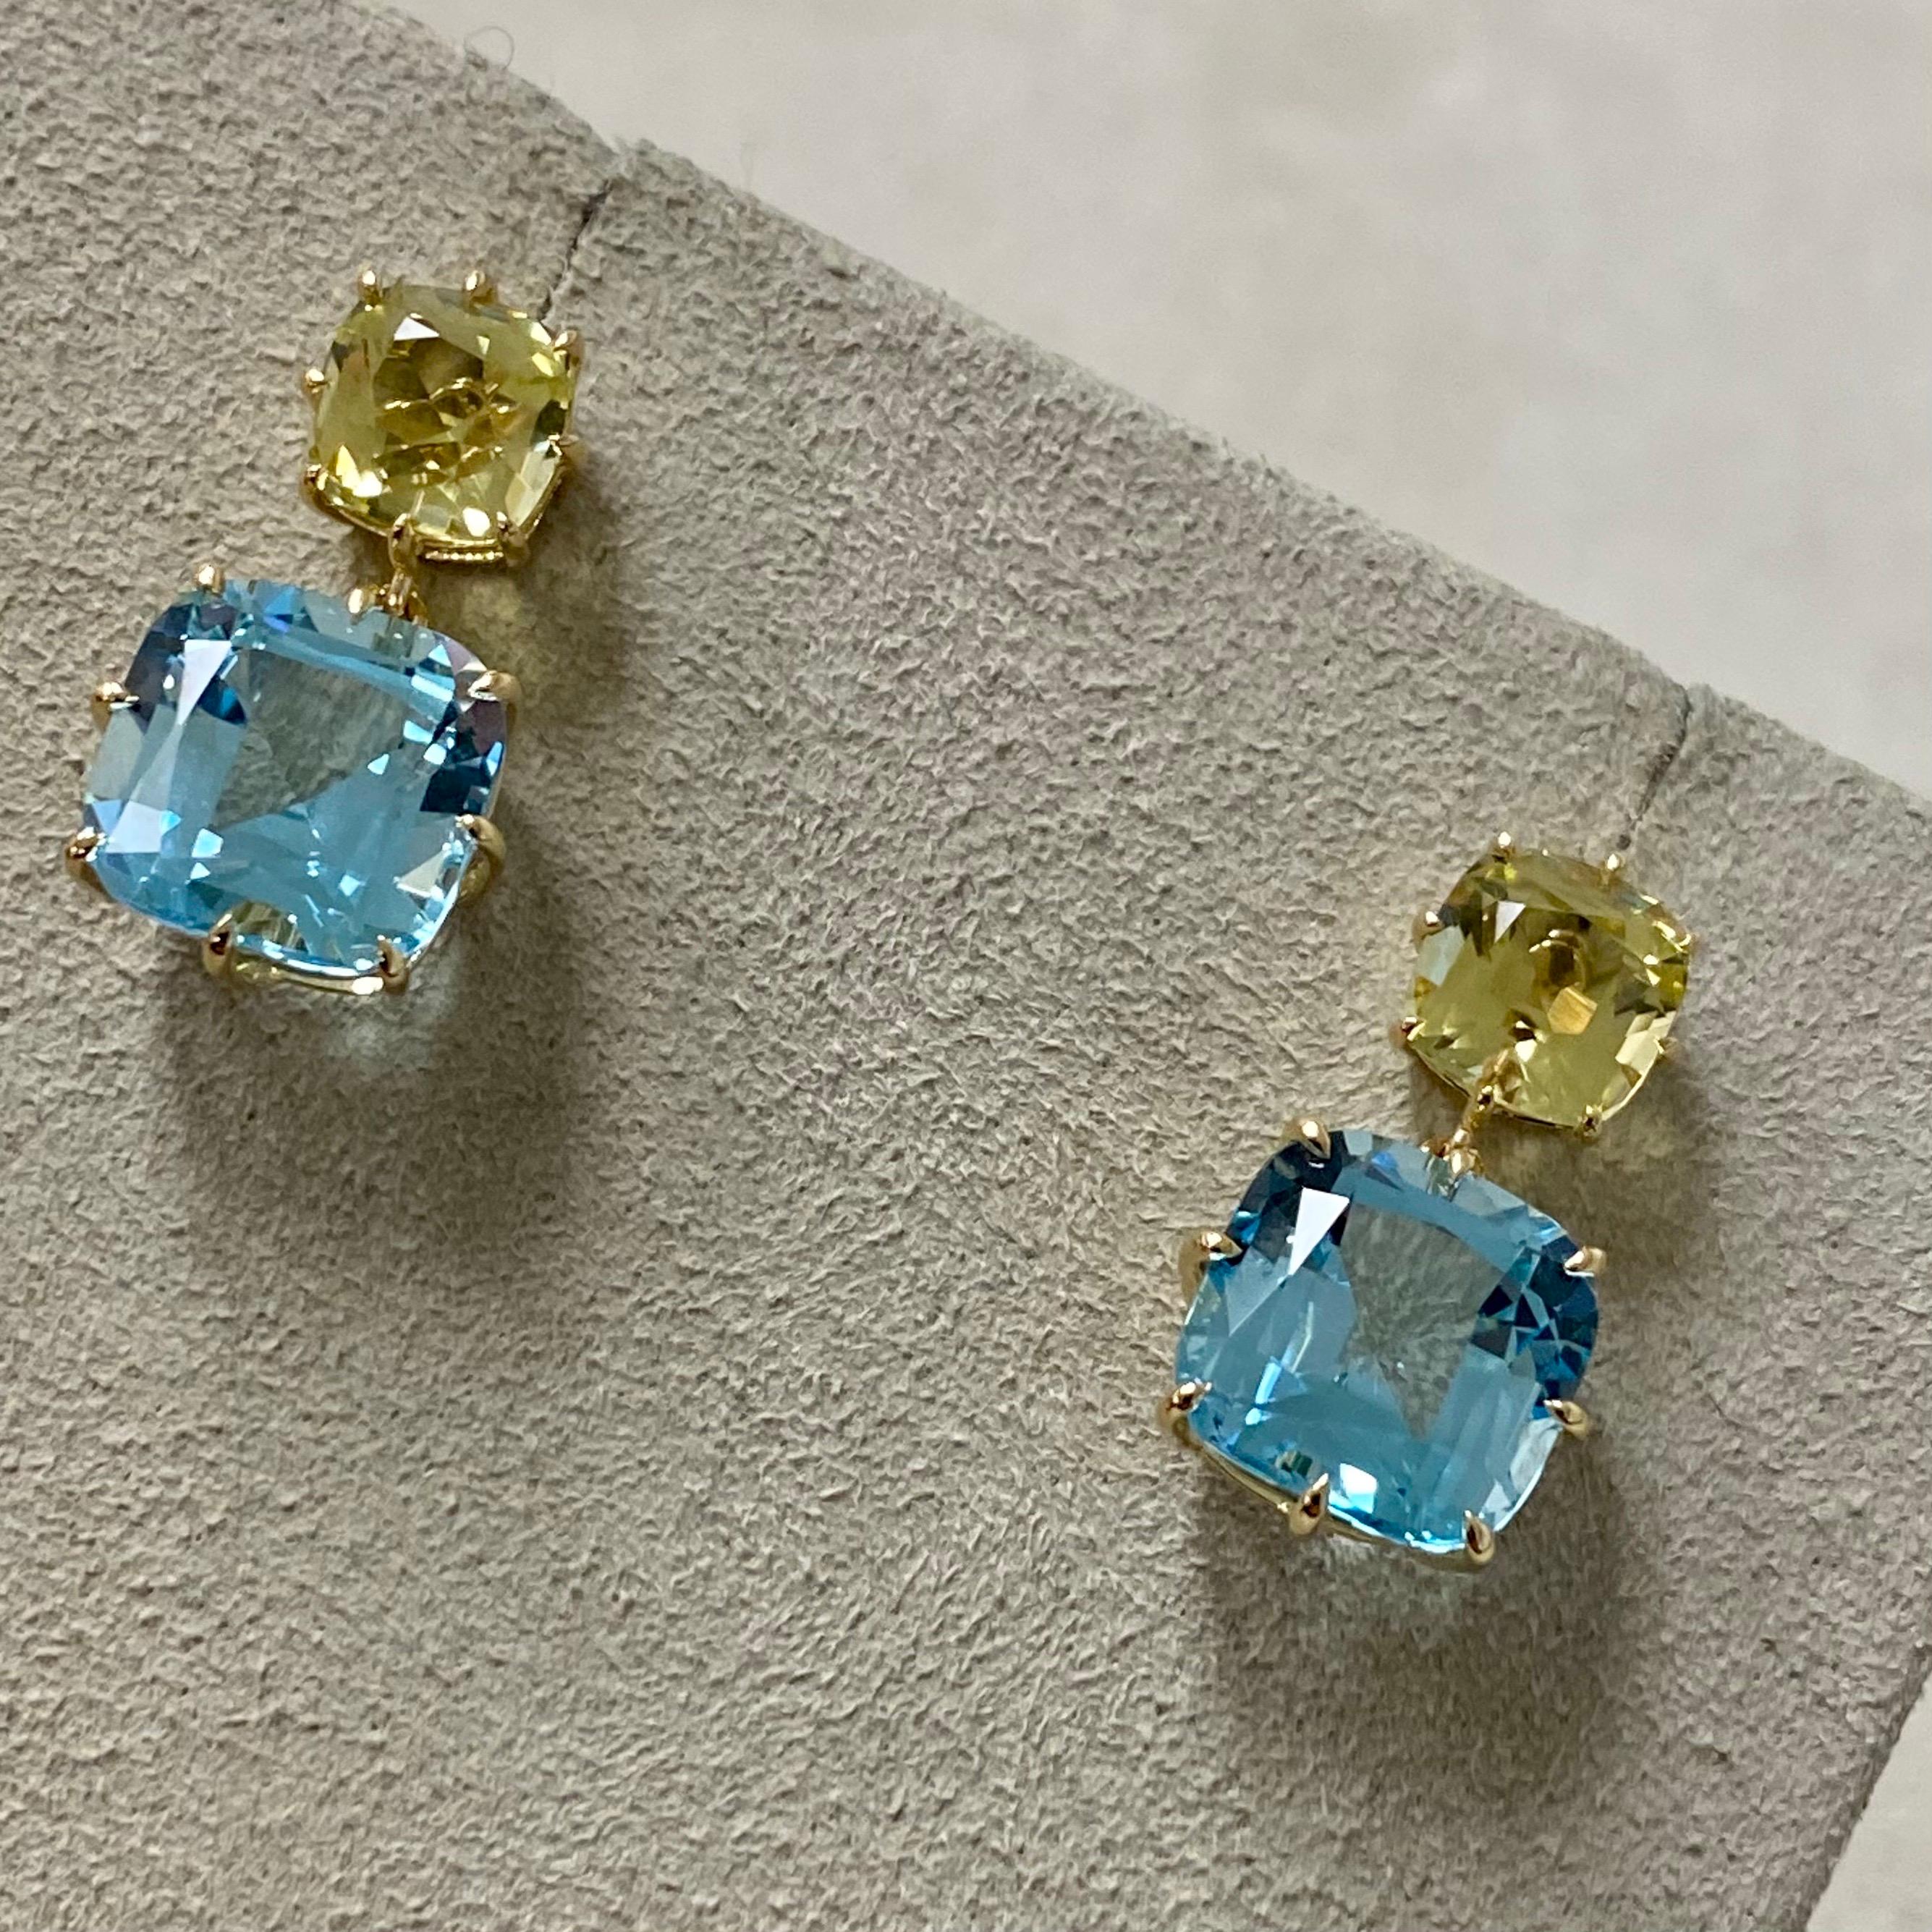 Created in 18 karat yellow gold
Lemon Quartz 2.50 carats approx.
Blue Topaz 11 carats approx.
Post backs for pierced ears
Limited Edition

Crafted from 18 karat golden alloy, these limited edition earrings showcase 2.50 carats of glittering lemon